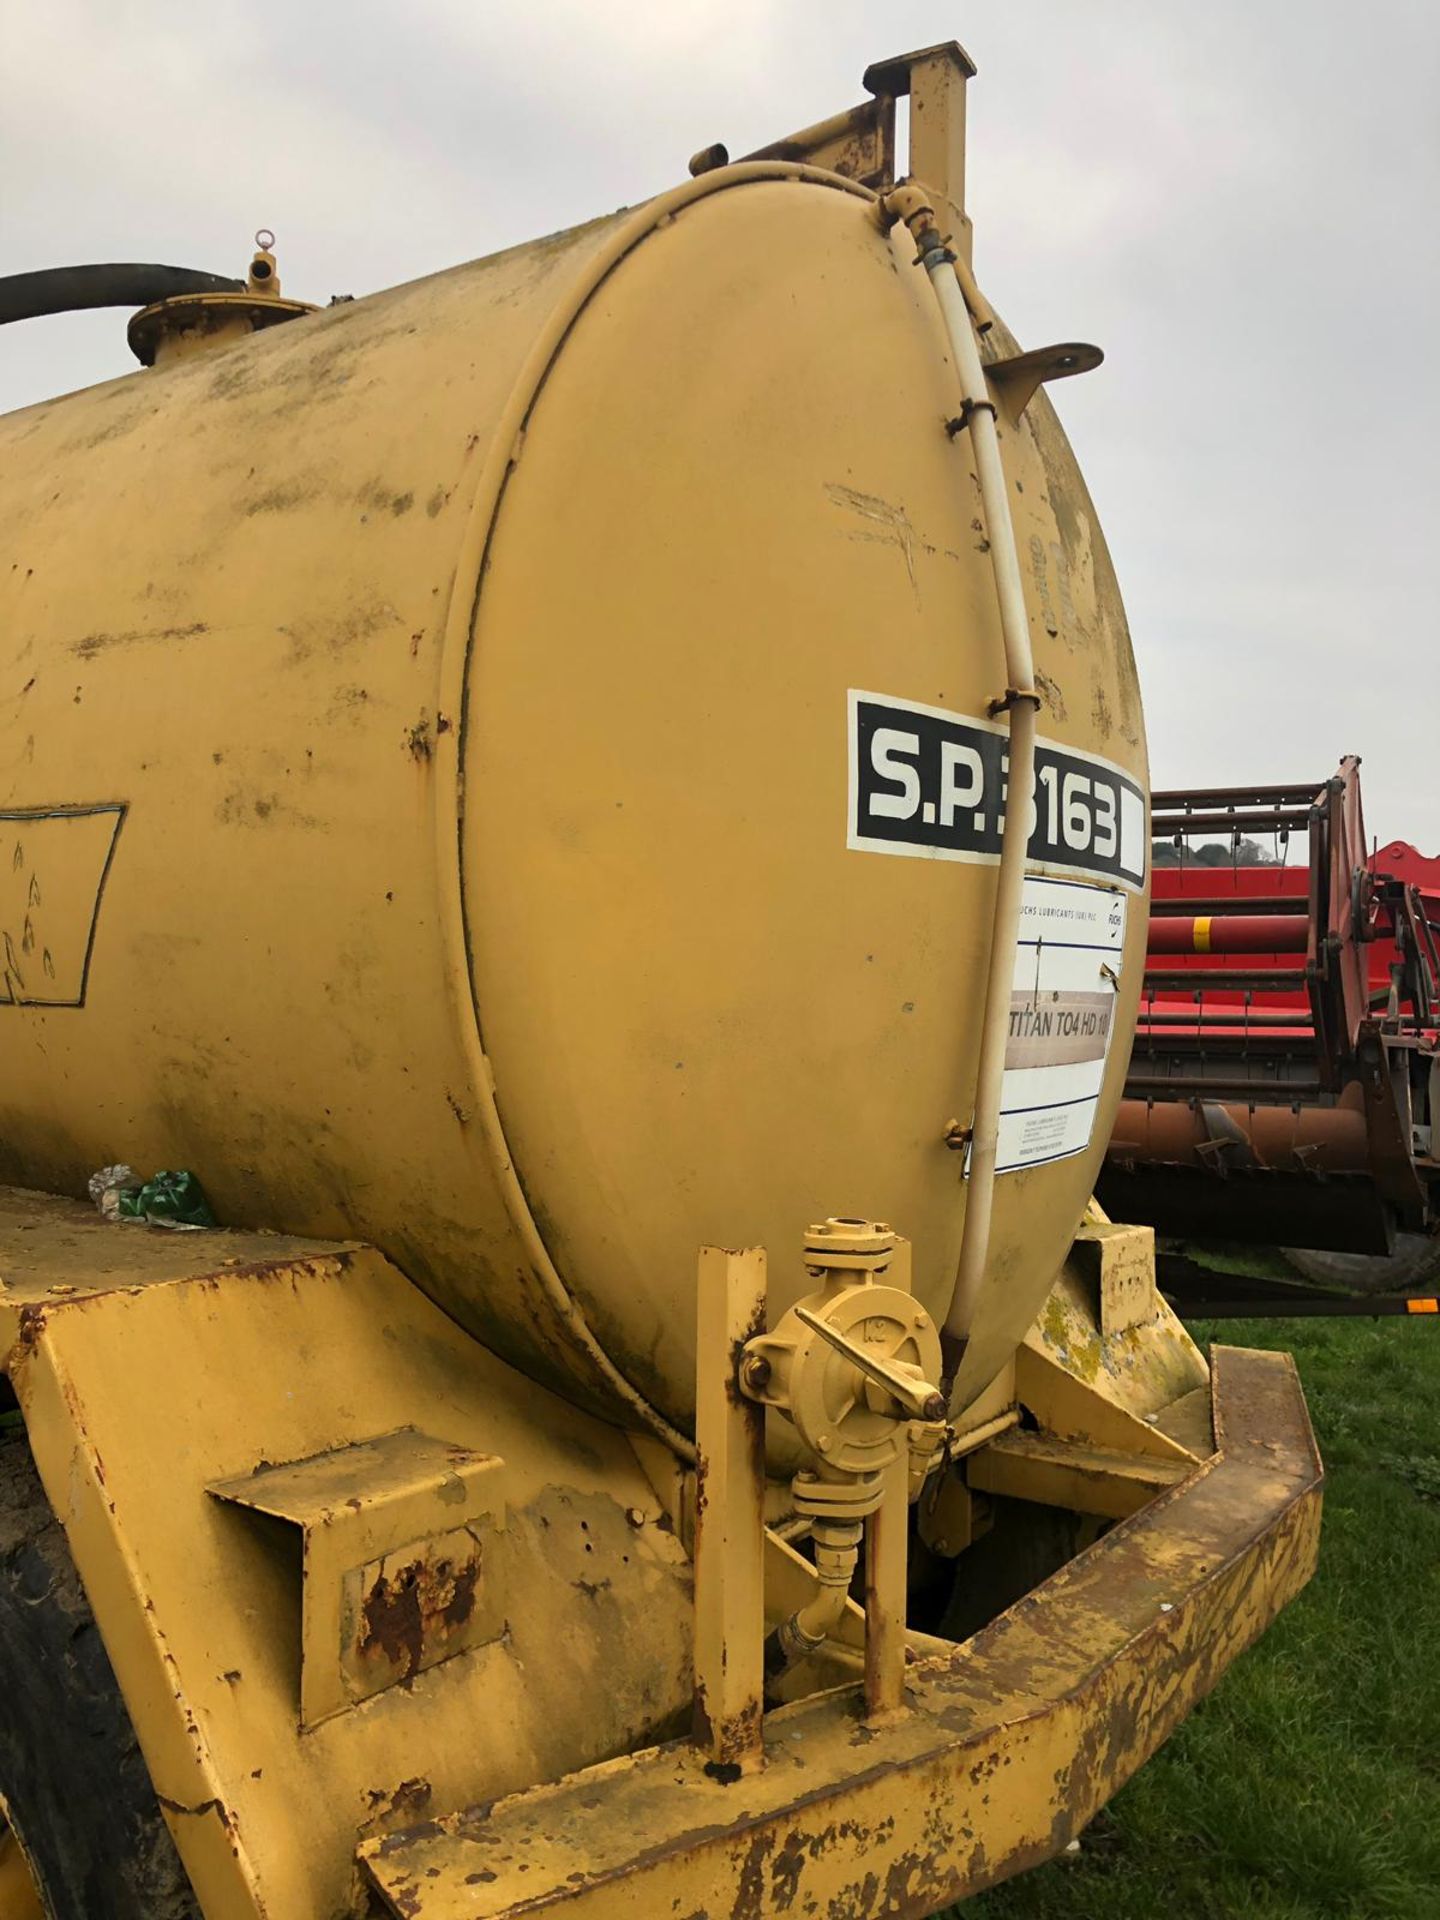 1989 TWIN AXLE TOW ABLE YELLOW OIL TANK, SERIAL NUMBER: VE 355 *PLUS VAT* - Image 5 of 10